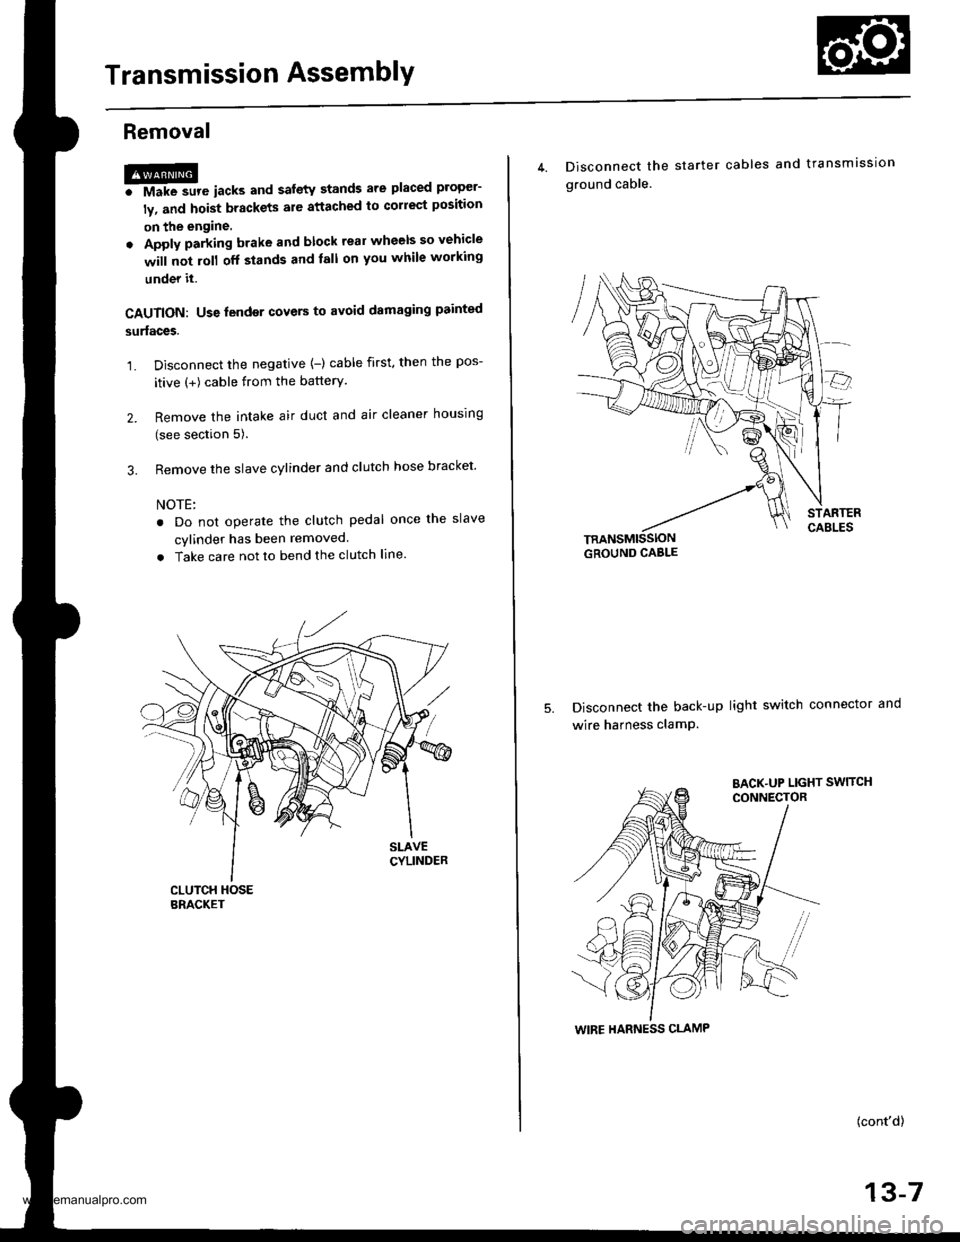 HONDA CR-V 2000 RD1-RD3 / 1.G User Guide 
Transmission AssemblY
Removal
@FMak. sw. iack" and safety stands are placed propel-
ly, and hoist brackets are attached to collect position
on the engine,
. Apply parking brake and block rear wheels 